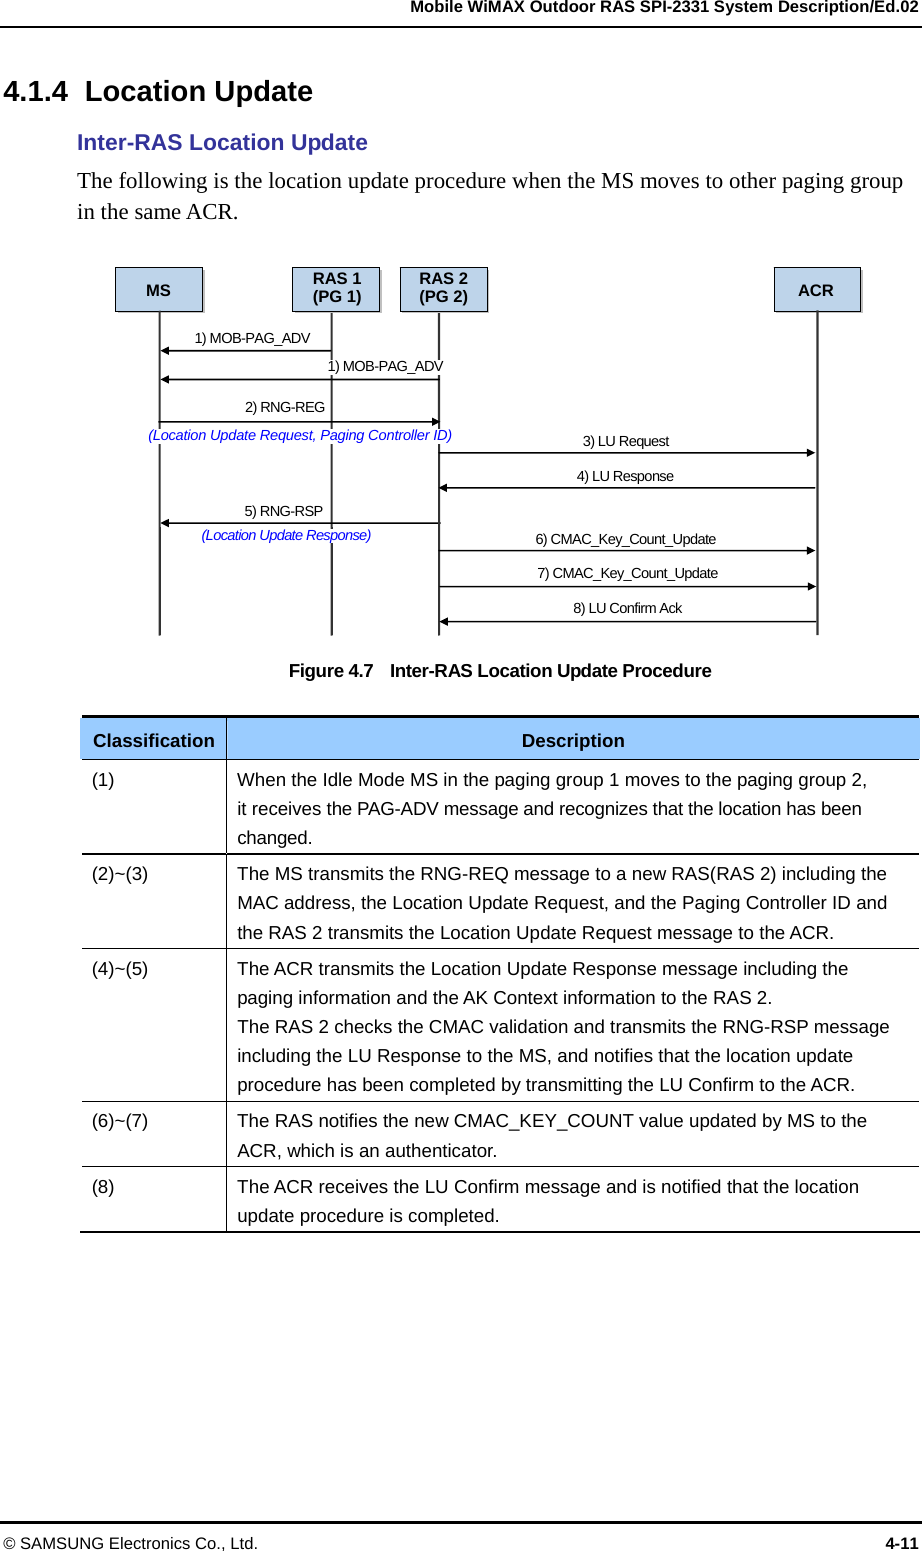   Mobile WiMAX Outdoor RAS SPI-2331 System Description/Ed.02 © SAMSUNG Electronics Co., Ltd.  4-11 4.1.4 Location Update Inter-RAS Location Update The following is the location update procedure when the MS moves to other paging group in the same ACR.    Figure 4.7    Inter-RAS Location Update Procedure  Classification Description (1)  When the Idle Mode MS in the paging group 1 moves to the paging group 2,   it receives the PAG-ADV message and recognizes that the location has been changed. (2)~(3)  The MS transmits the RNG-REQ message to a new RAS(RAS 2) including the MAC address, the Location Update Request, and the Paging Controller ID and the RAS 2 transmits the Location Update Request message to the ACR. (4)~(5)  The ACR transmits the Location Update Response message including the paging information and the AK Context information to the RAS 2.   The RAS 2 checks the CMAC validation and transmits the RNG-RSP message including the LU Response to the MS, and notifies that the location update procedure has been completed by transmitting the LU Confirm to the ACR. (6)~(7)  The RAS notifies the new CMAC_KEY_COUNT value updated by MS to the ACR, which is an authenticator. (8)  The ACR receives the LU Confirm message and is notified that the location update procedure is completed.  MS RAS 1(PG 1) ACR 1) MOB-PAG_ADV 5) RNG-RSP (Location Update Response)RAS 2(PG 2)1) MOB-PAG_ADV2) RNG-REG (Location Update Request, Paging Controller ID) 3) LU Request4) LU Response6) CMAC_Key_Count_Update   7) CMAC_Key_Count_Update   8) LU Confirm Ack